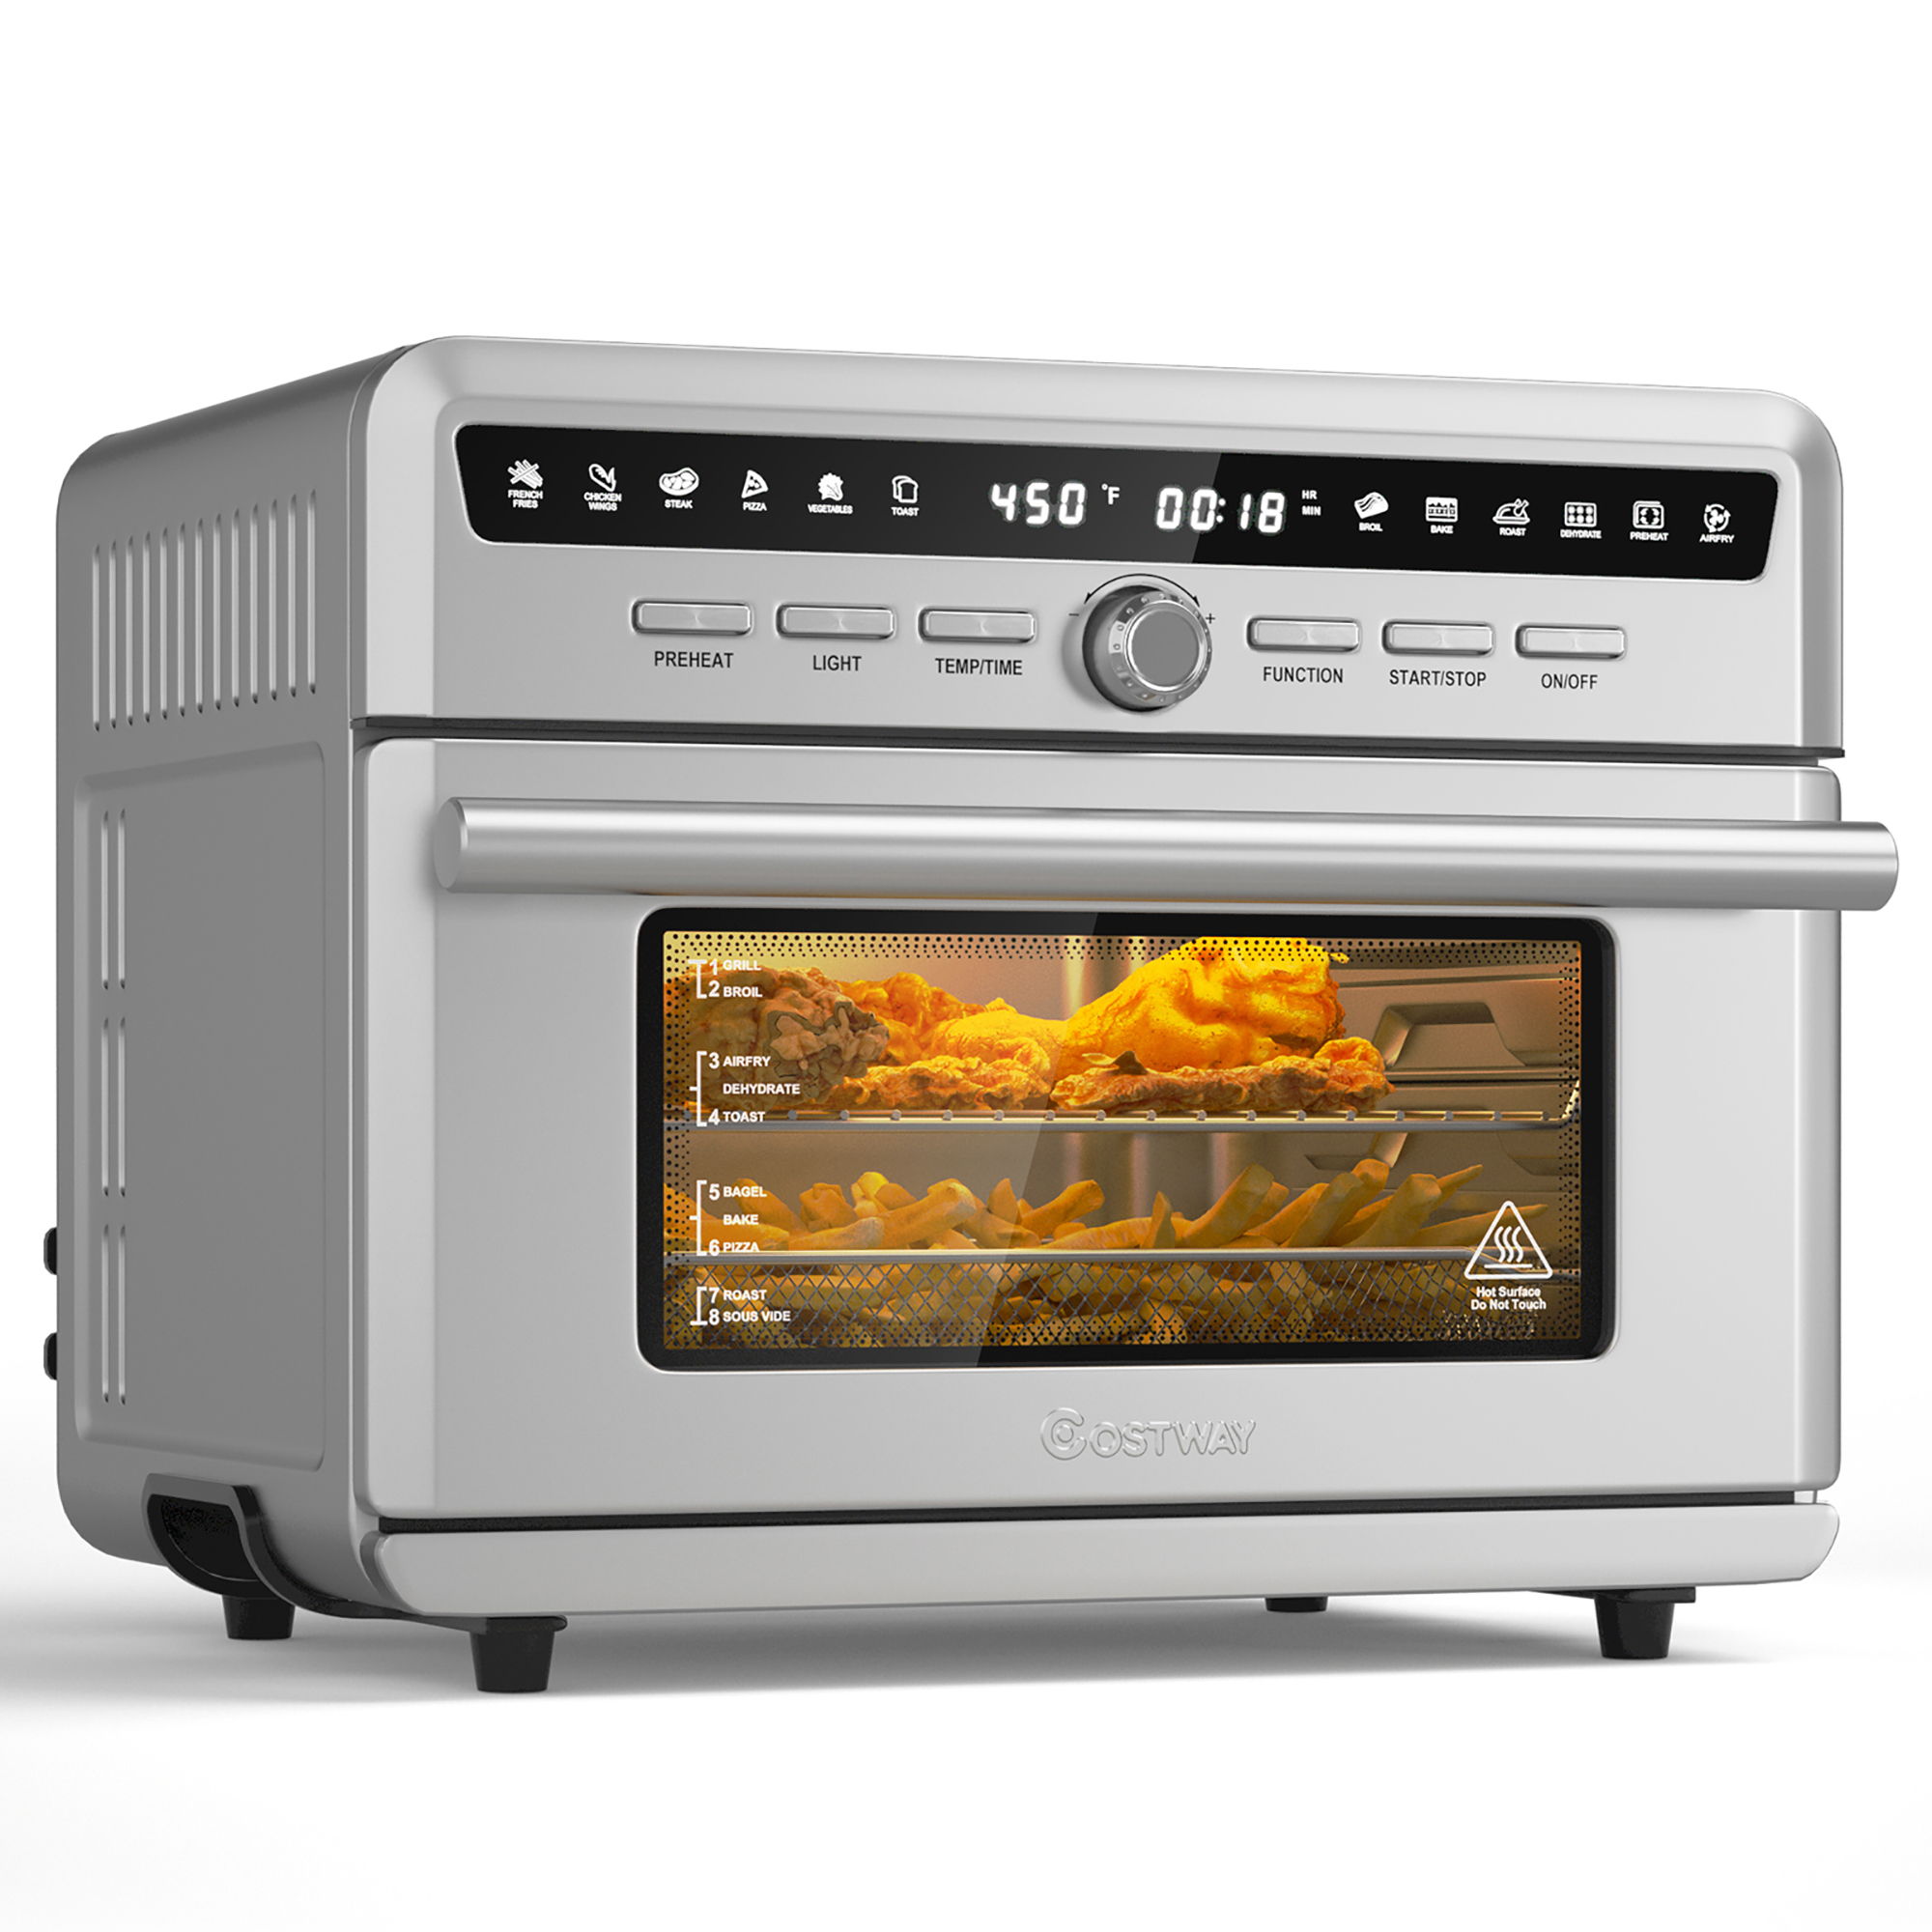 Costway 26.4 QT 10-in-1 Air Fryer Toaster Oven Dehydrate Bake 1800W w/ Recipe - image 1 of 10